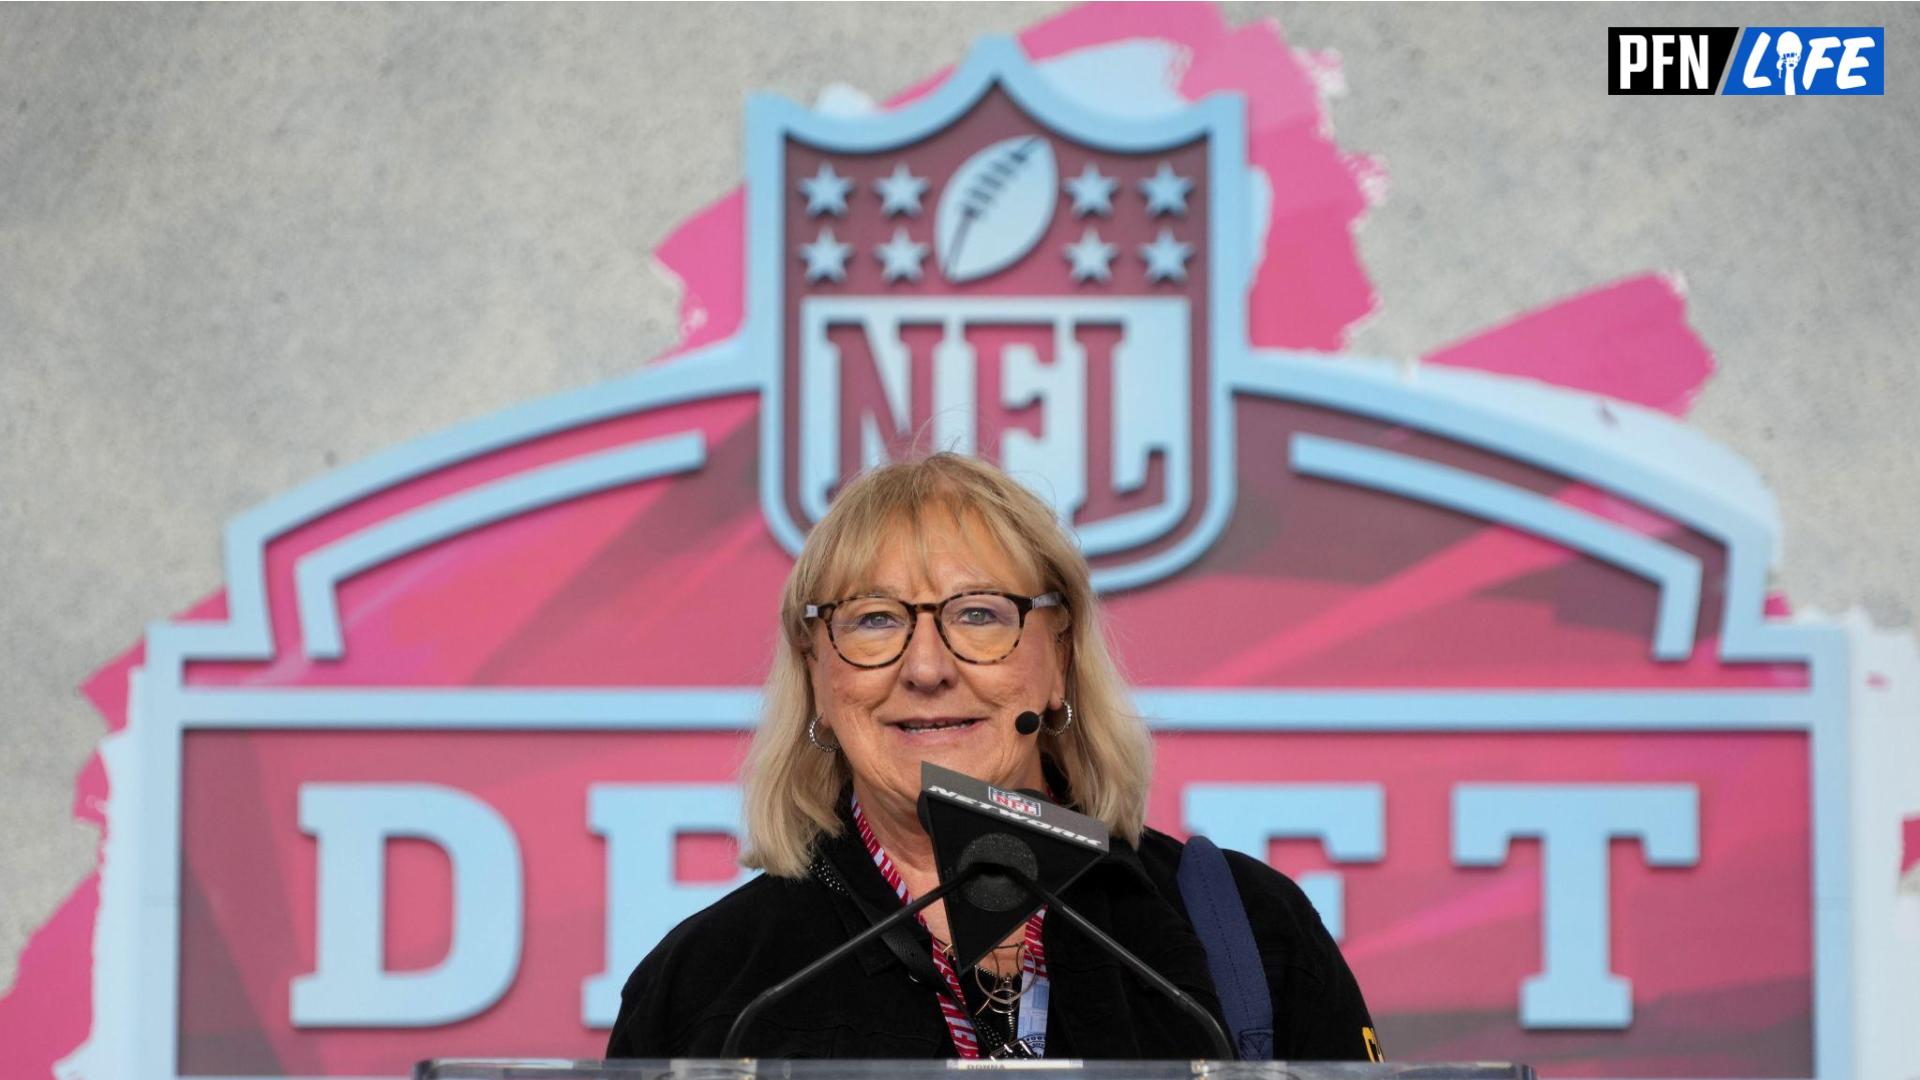 Jason and Travis Kelce's mother, Donna Kelce, presents a pick at the NFL Draft.